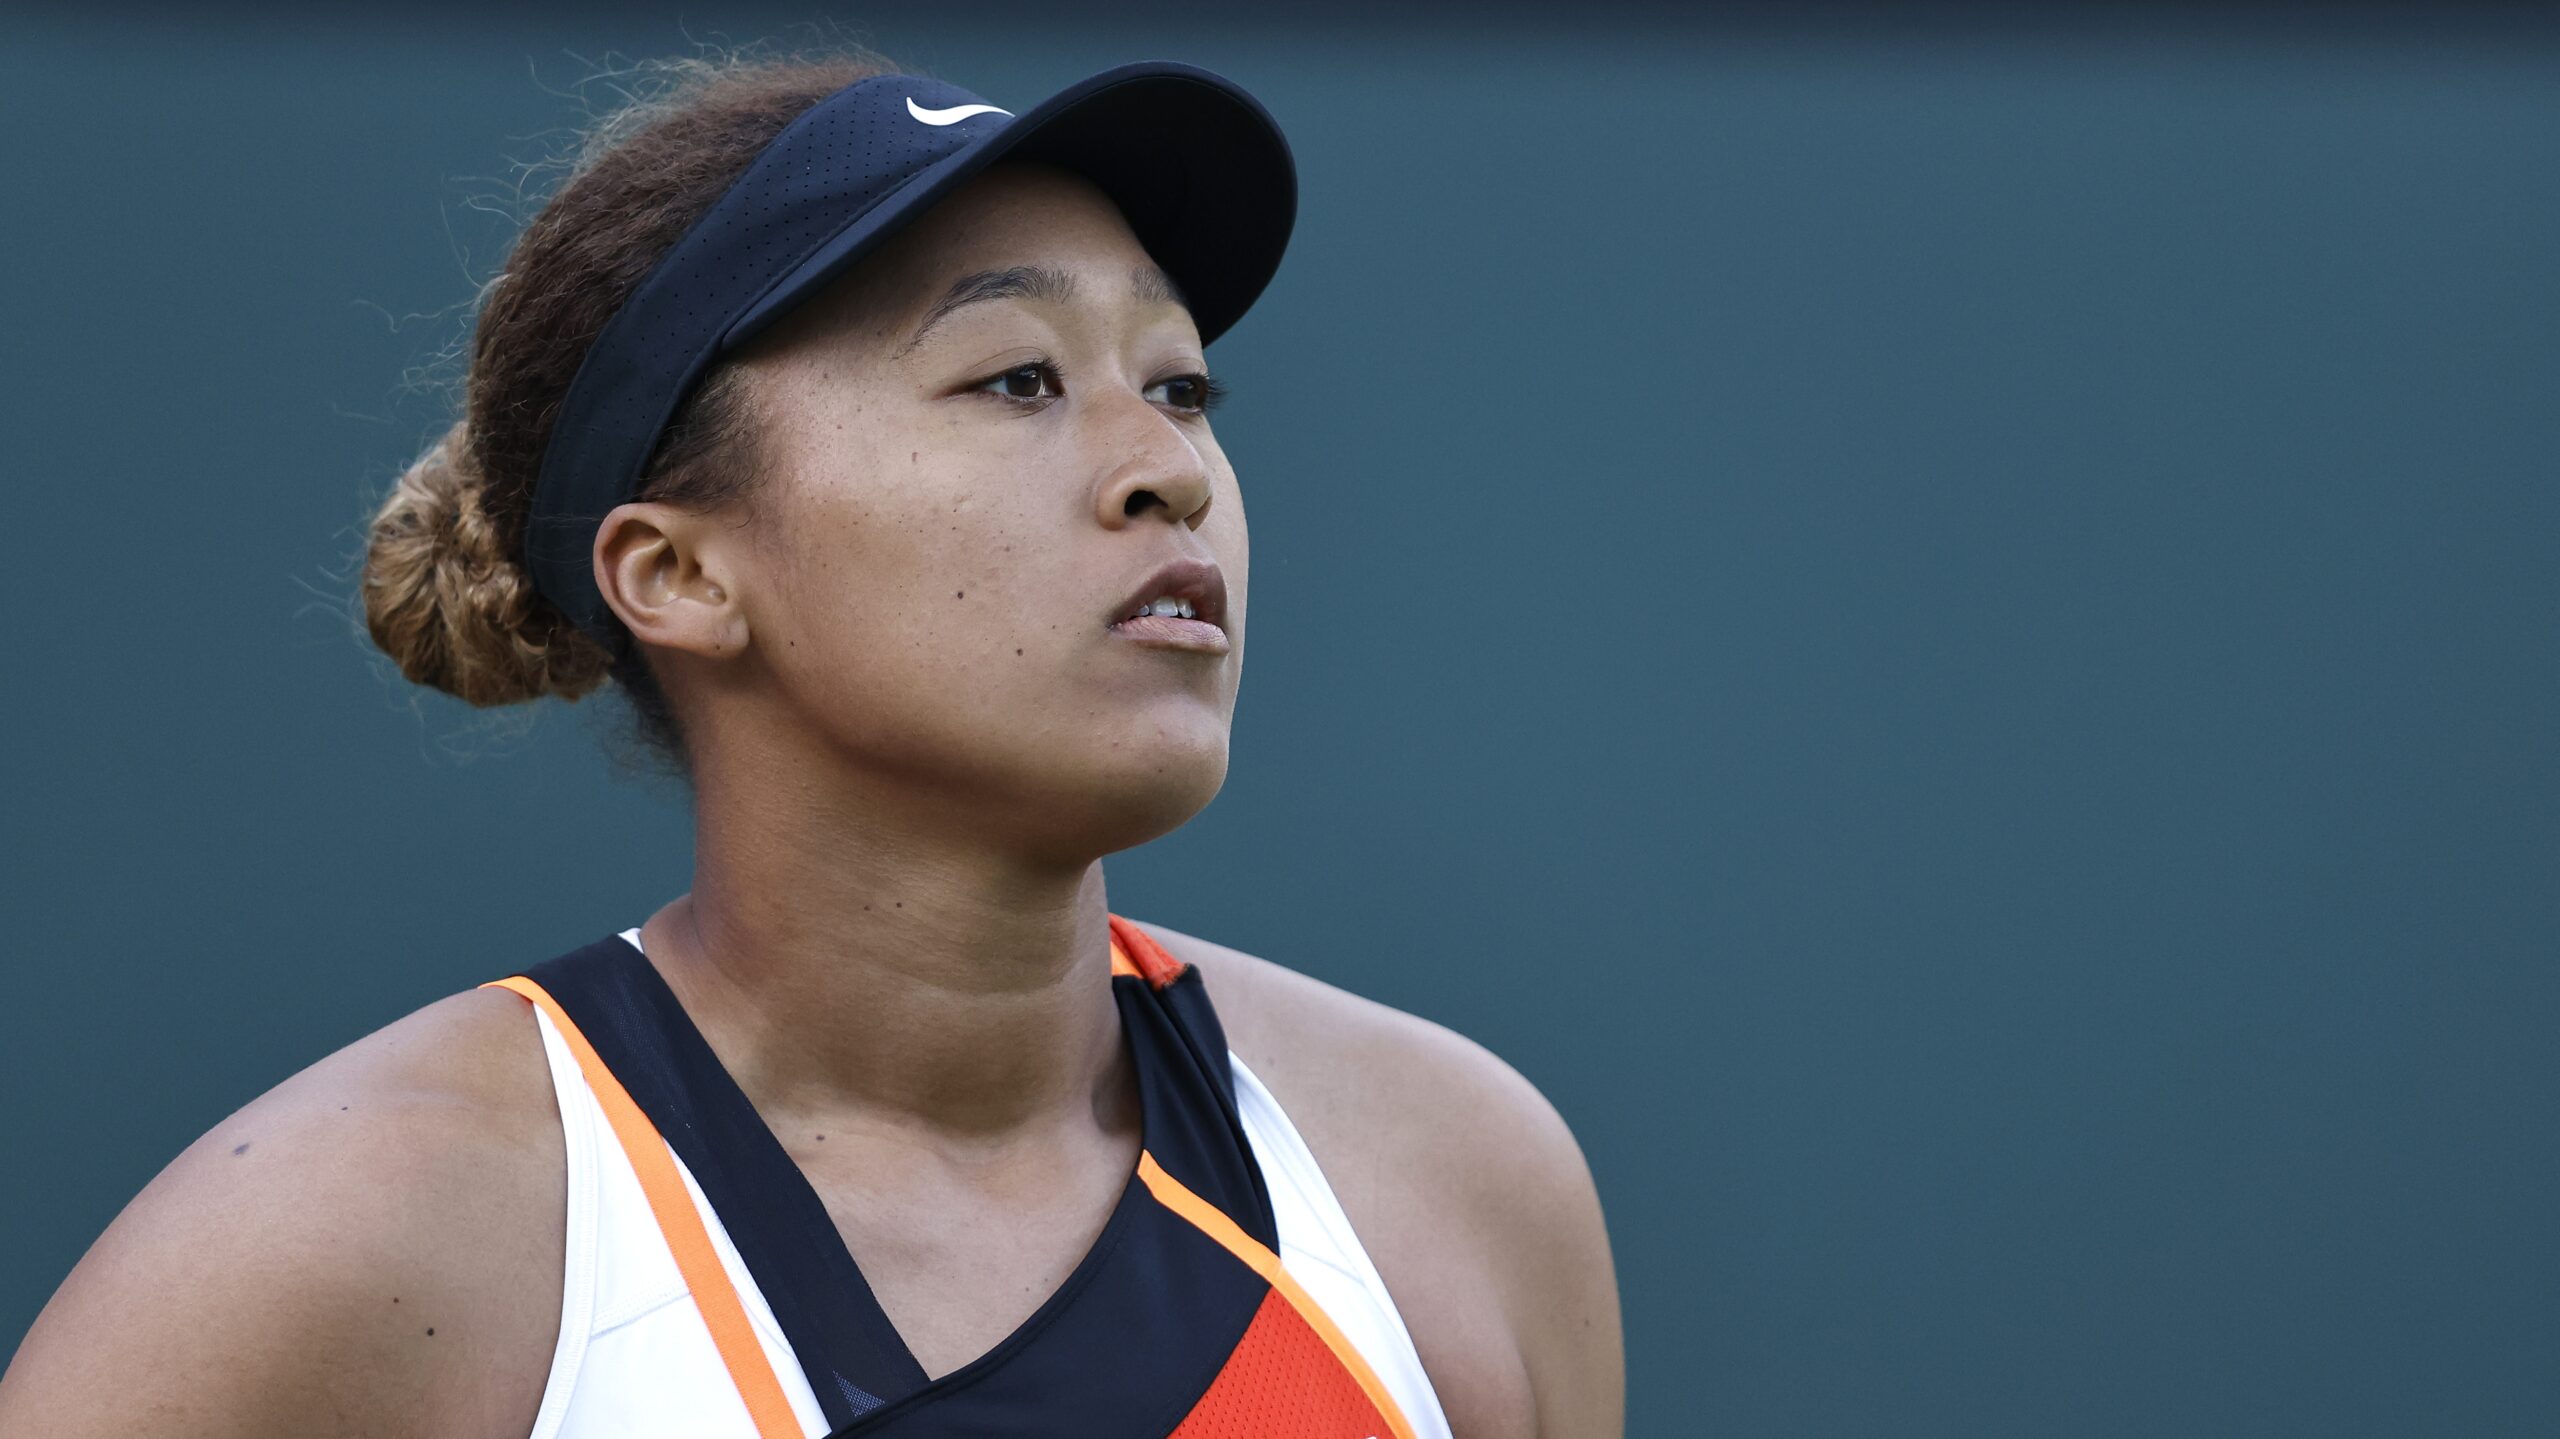 Naomi Osaka Stands Up Against Heckler In Indian Wells Tournament